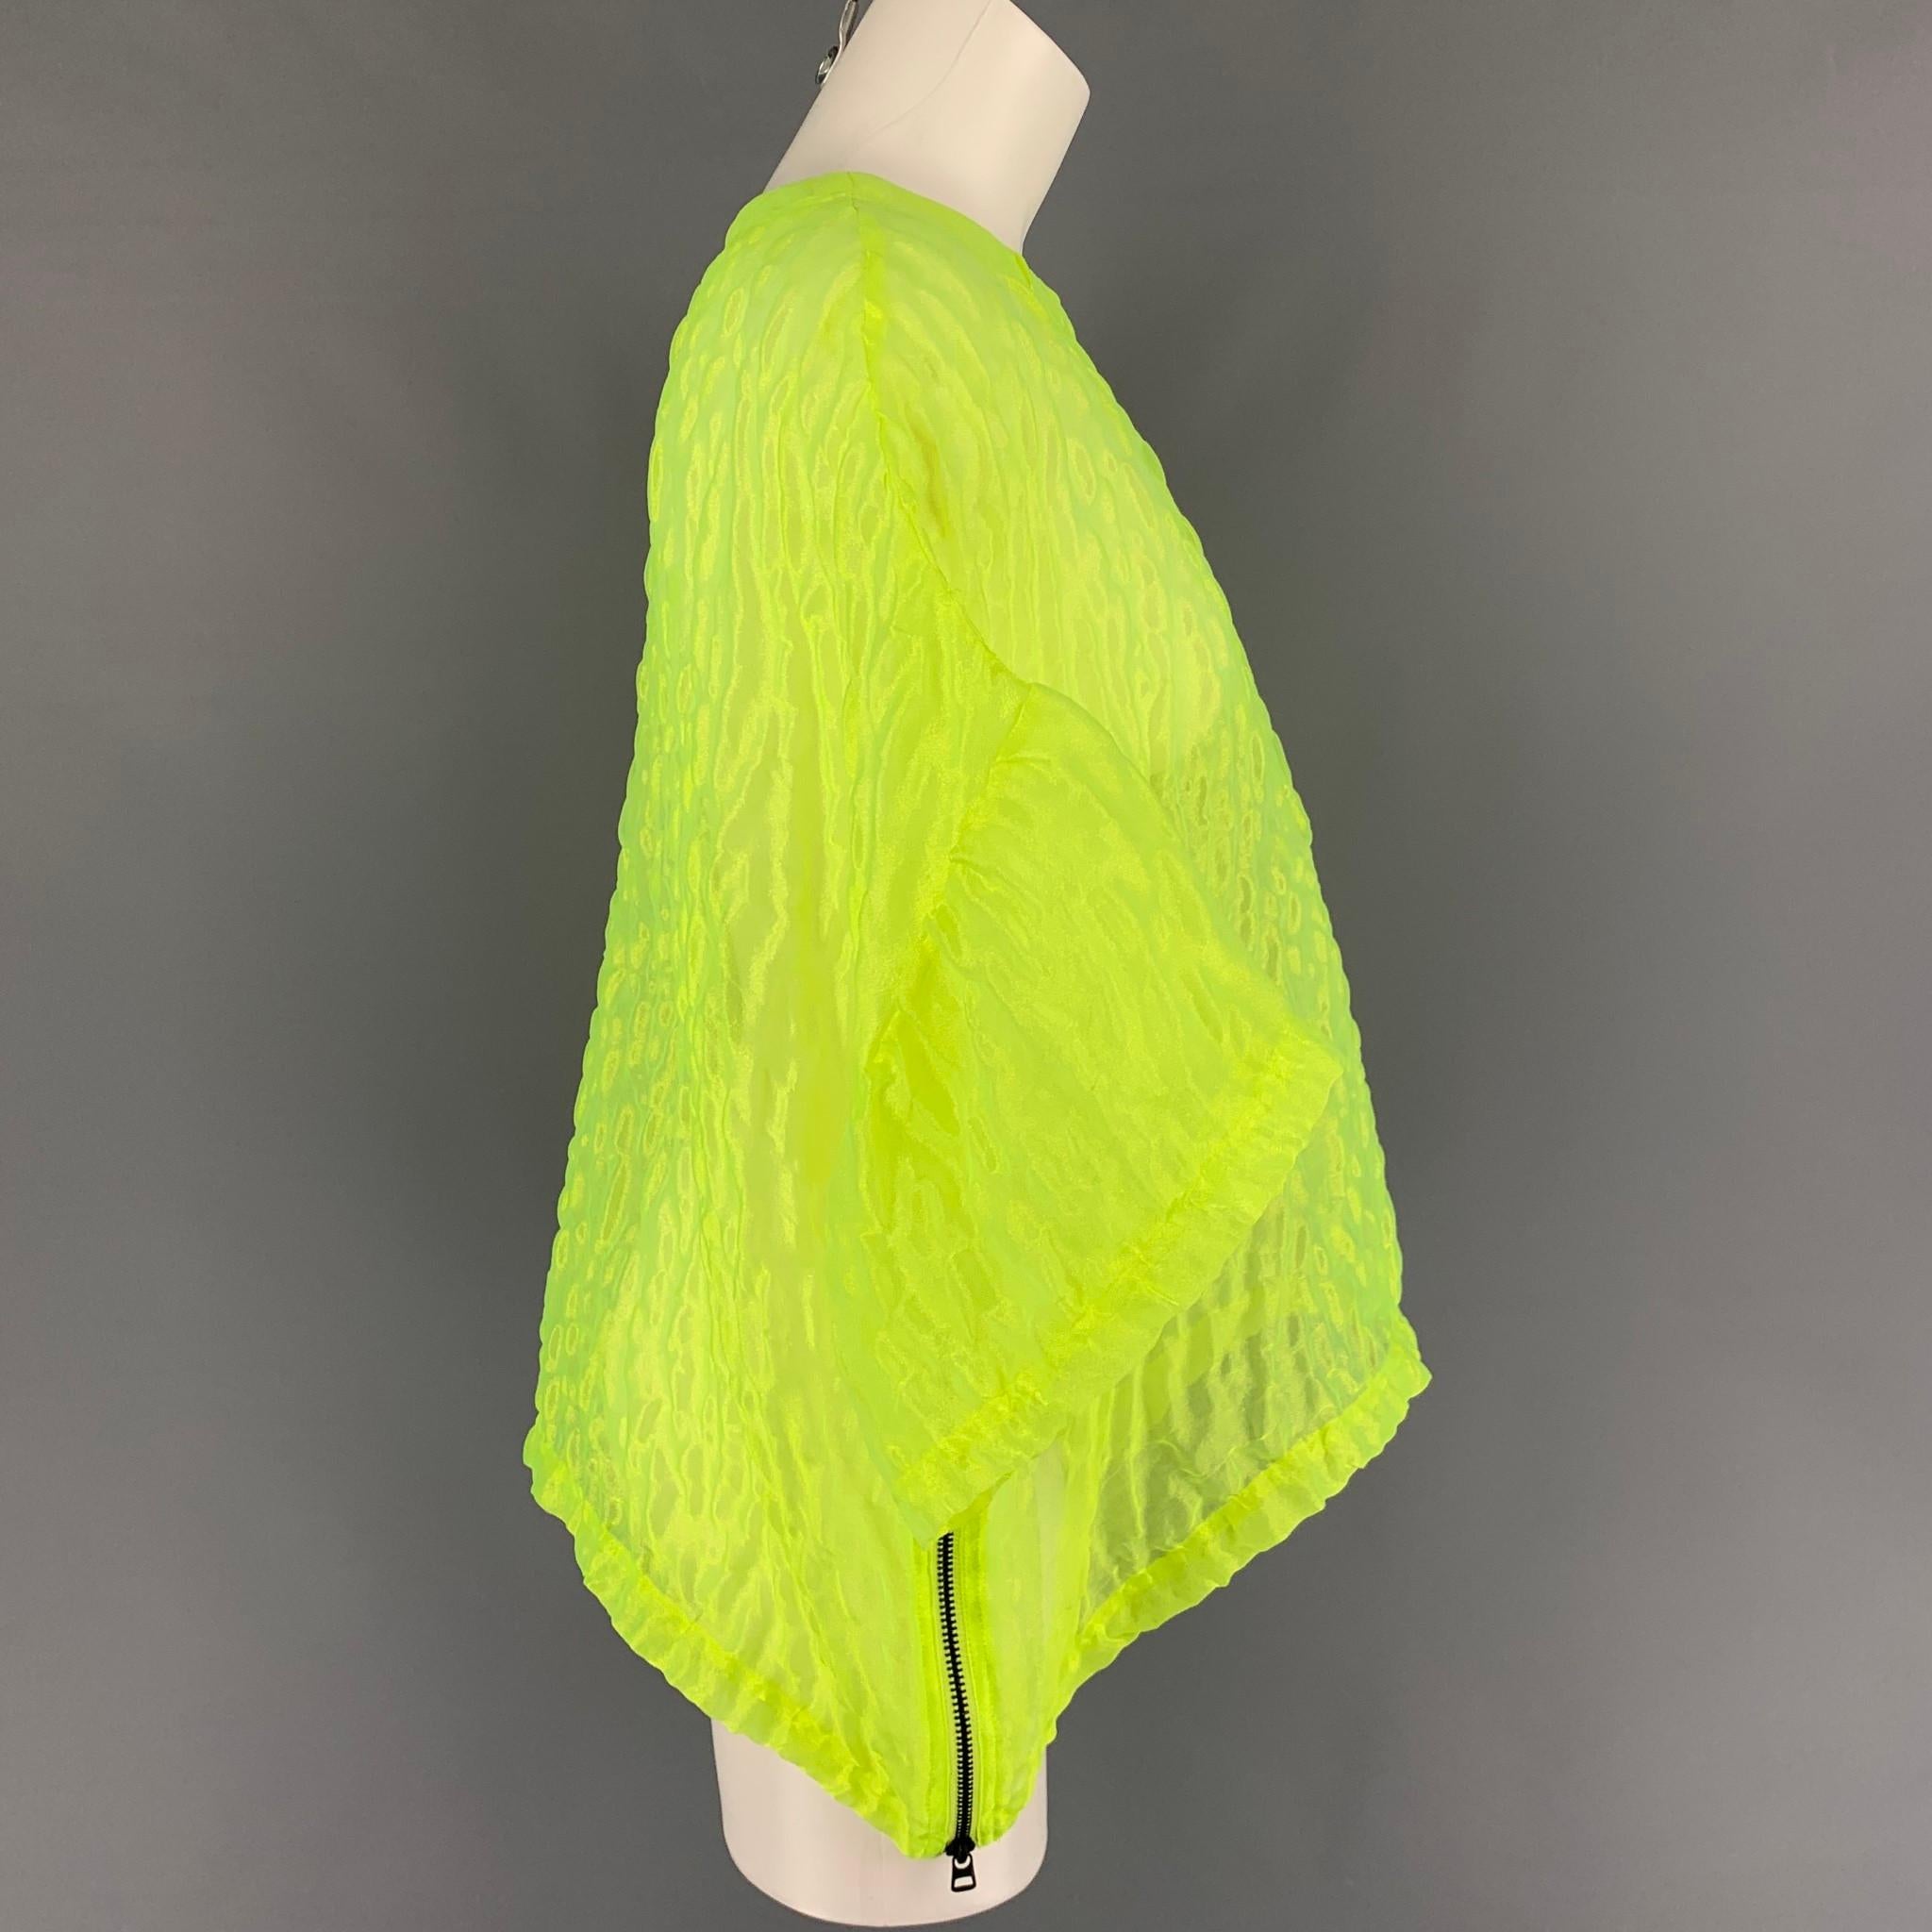 OPENING CEREMONY dress top comes in a neon textured material featuring a oversized fit, side zippers, and a crew-neck. 

New With Tags. 
Marked: XS

Measurements:

Shoulder: 26 in.
Bust: 52 in.
Sleeve: 7 in.
Length: 23 in. 